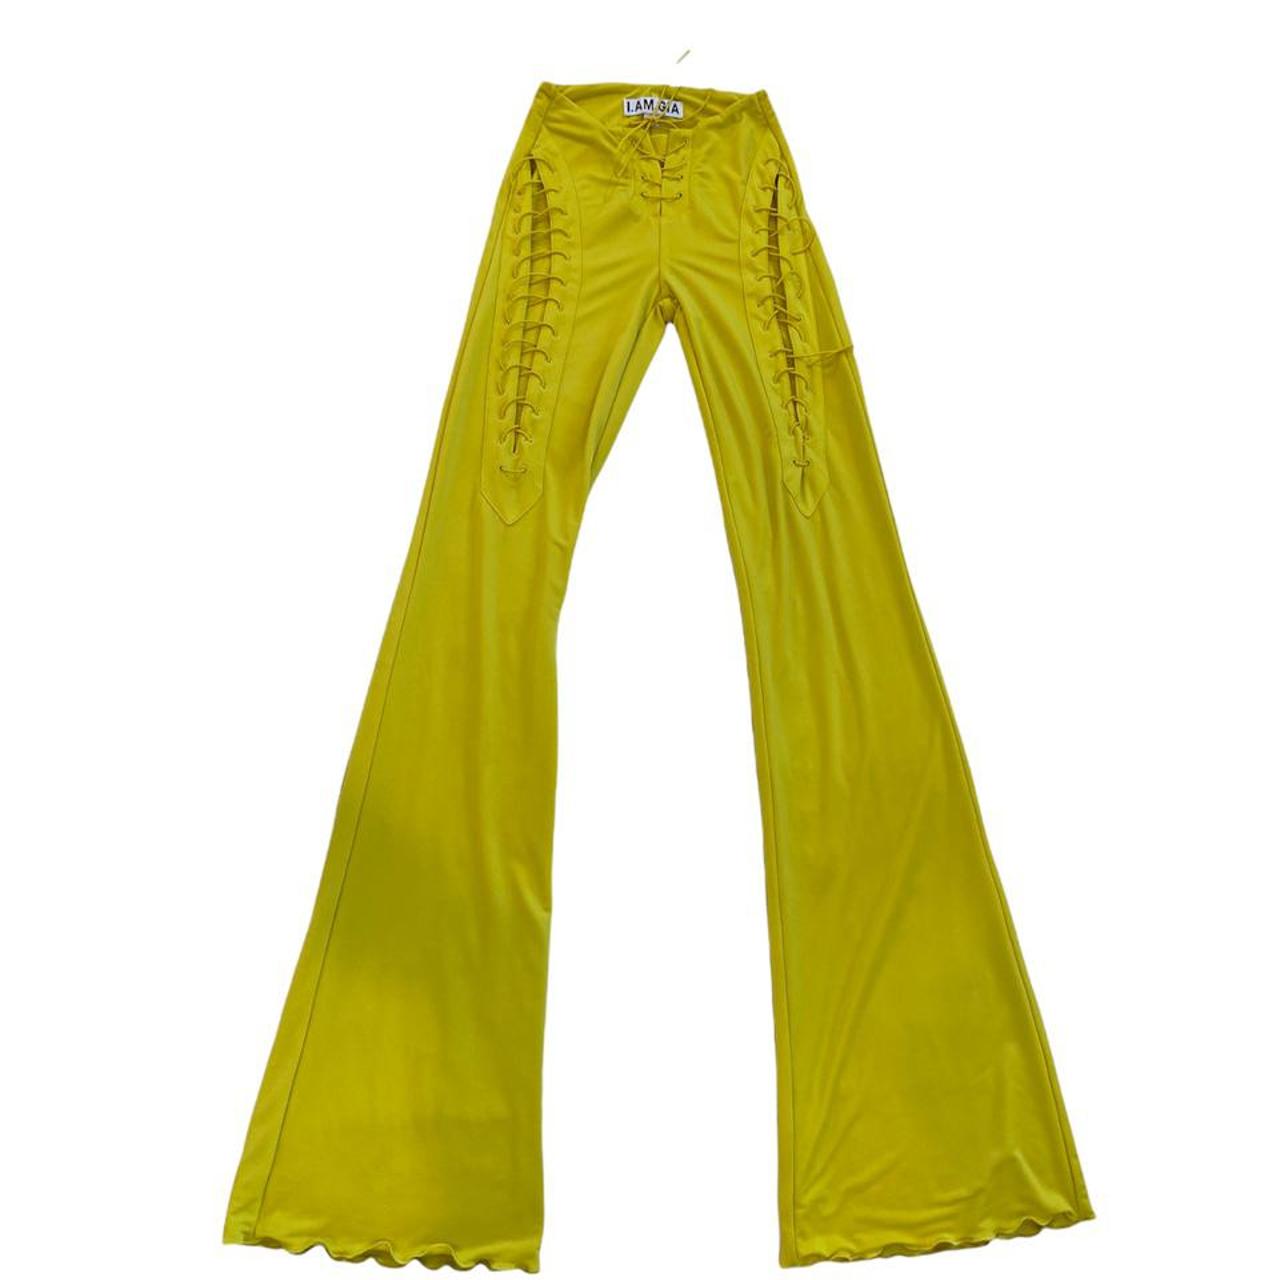 Iamgia yellow tie pants💛 (only worn once but the... - Depop